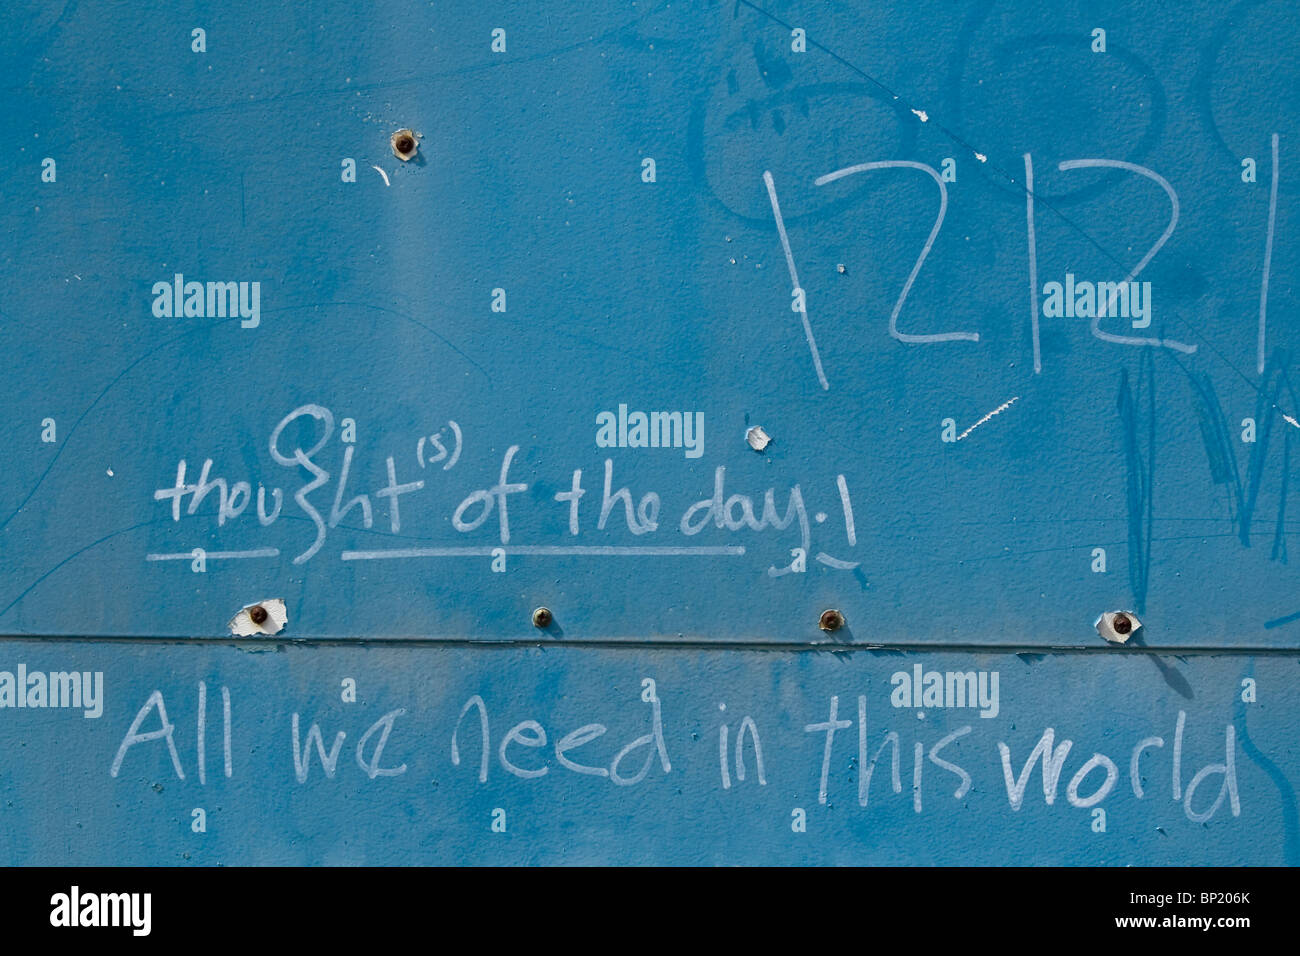 Graffiti on a blue wall suggesting thought of the day. Stock Photo